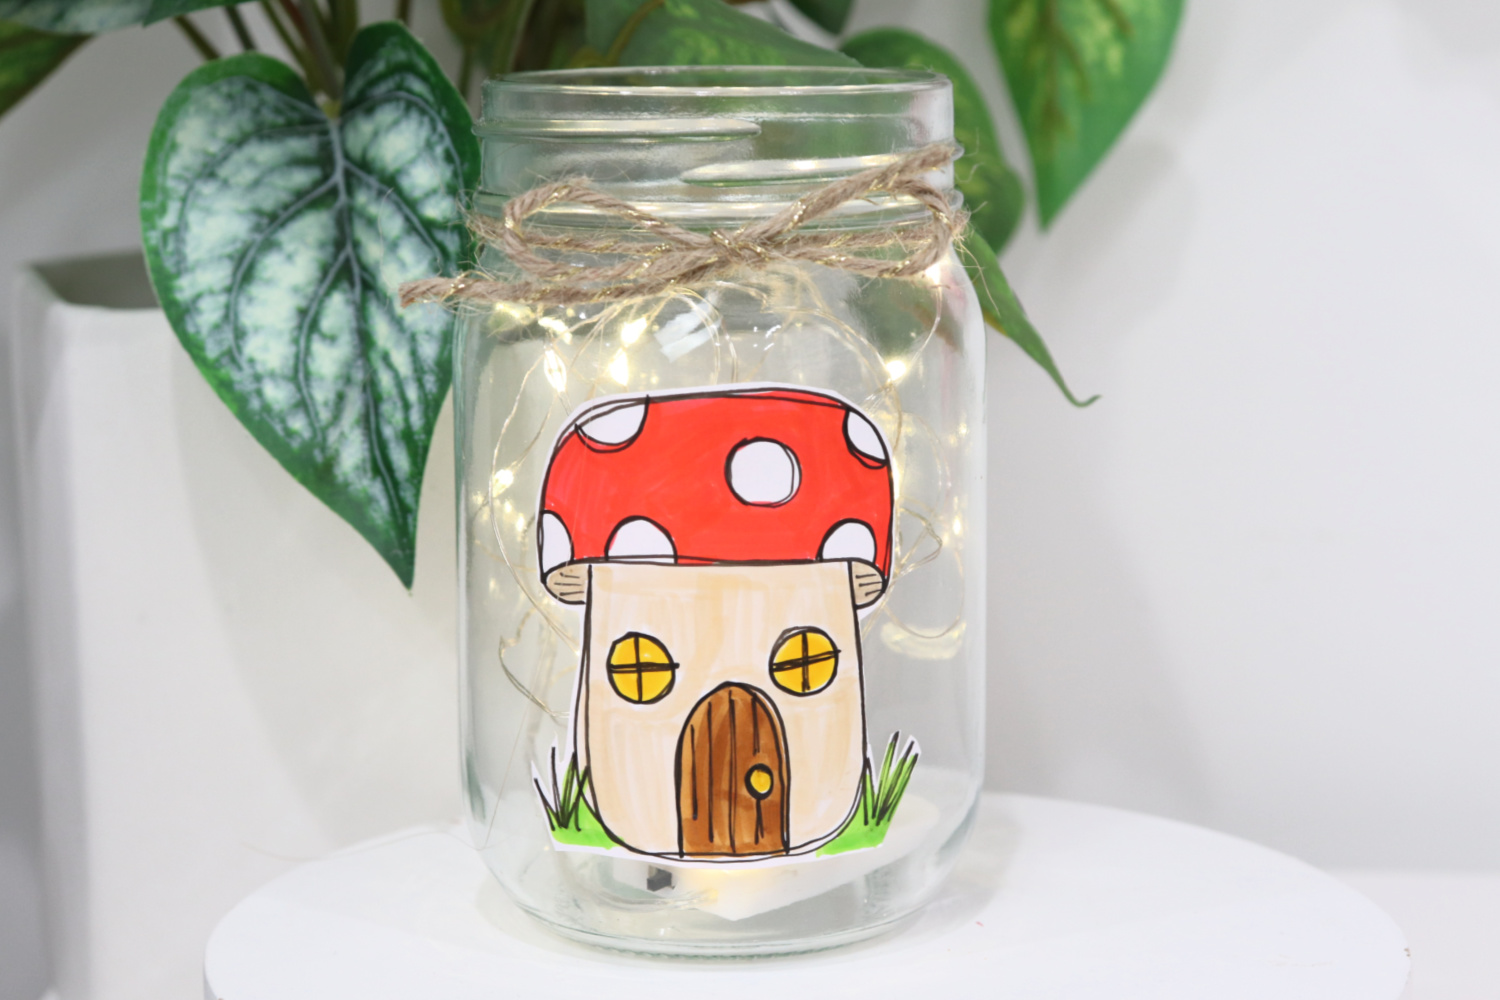 Image contains a mason jar with a toadstool house sticker on the front, filled with fairy lights. A piece of twine is tied around the mouth of the jar. It sits on a white surface with a faux plant behind it.